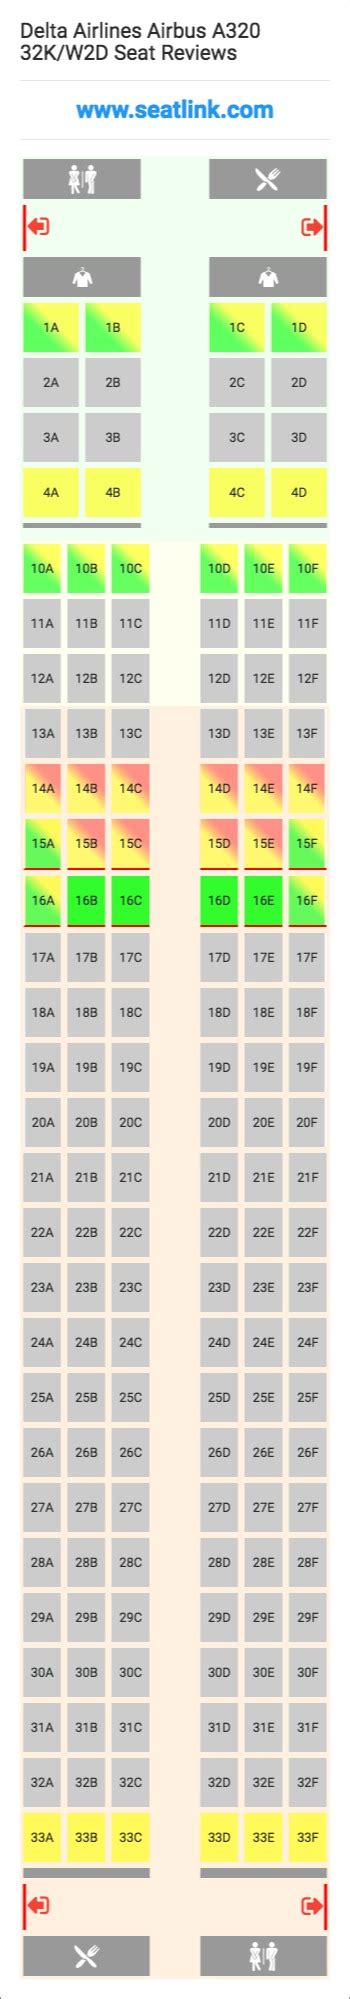 Delta Airlines Airbus A320 32K/W2D Seating Chart - Updated April 2022 - SeatLink